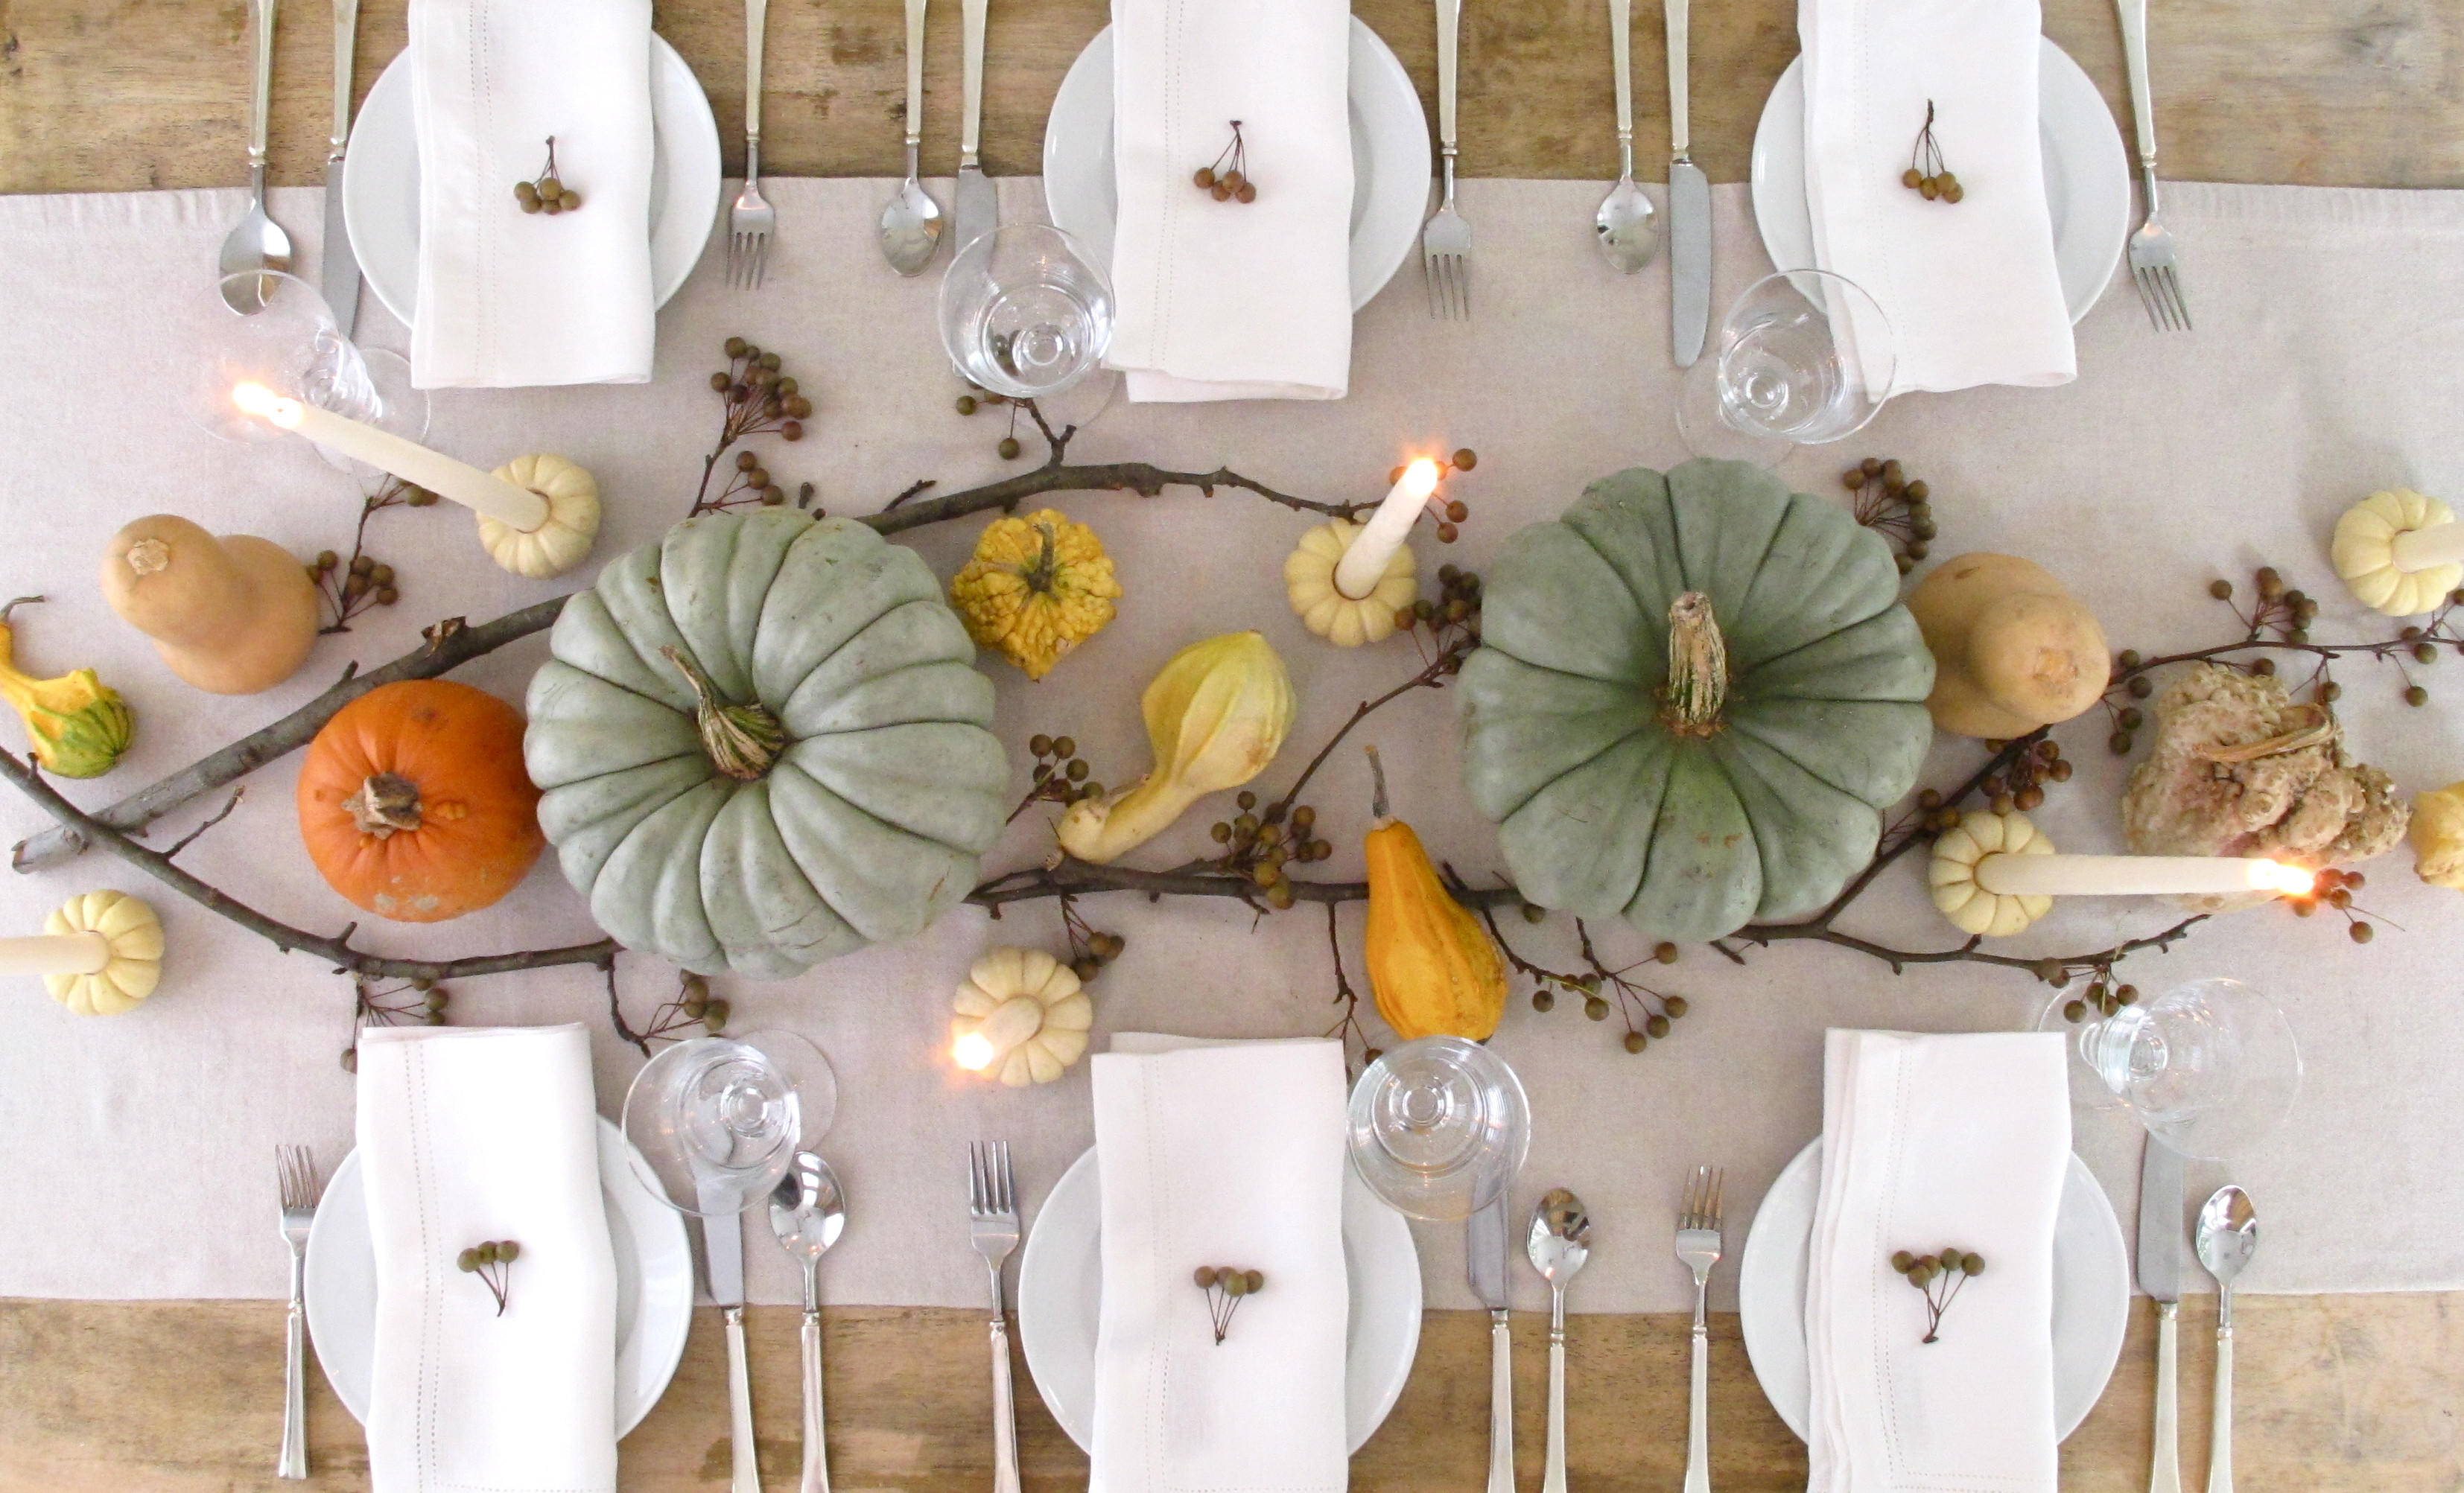 Easy Thanksgiving Table Decorations
 Our favorite Thanksgiving Day table settings TODAY